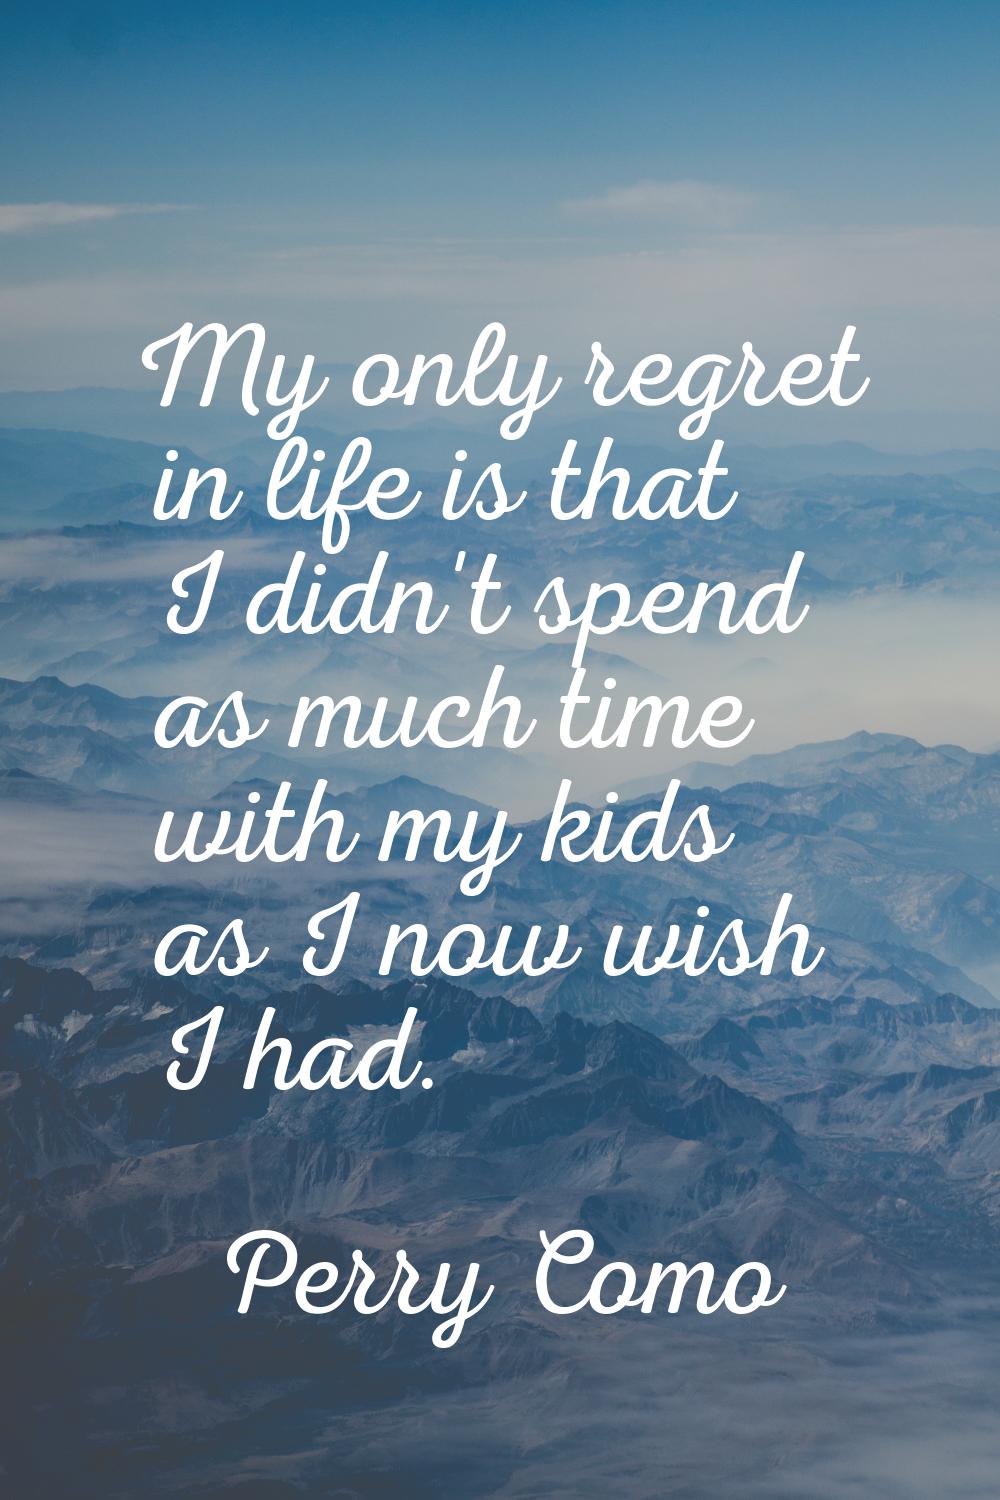 My only regret in life is that I didn't spend as much time with my kids as I now wish I had.